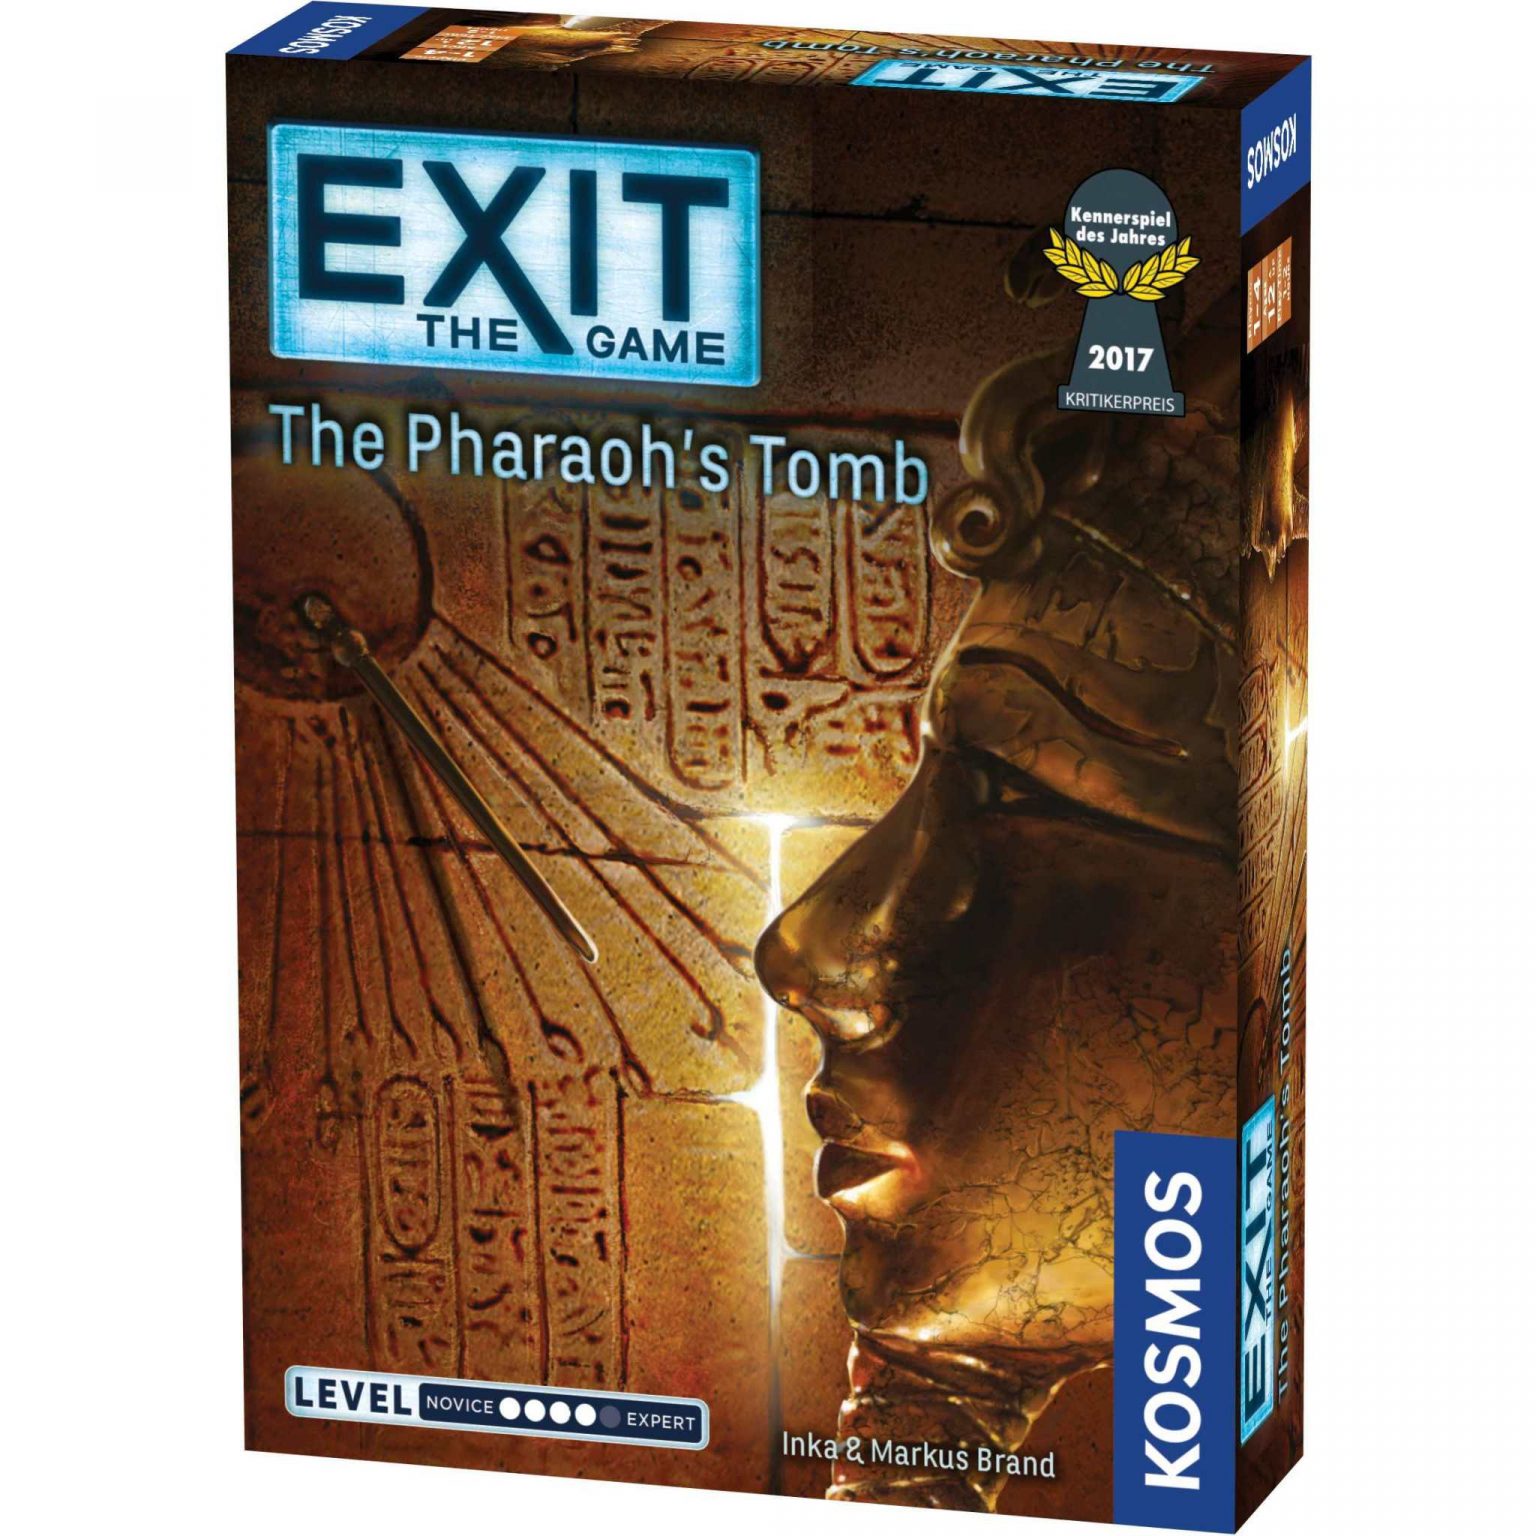 Exit: The Pharaoah‘s Tomb